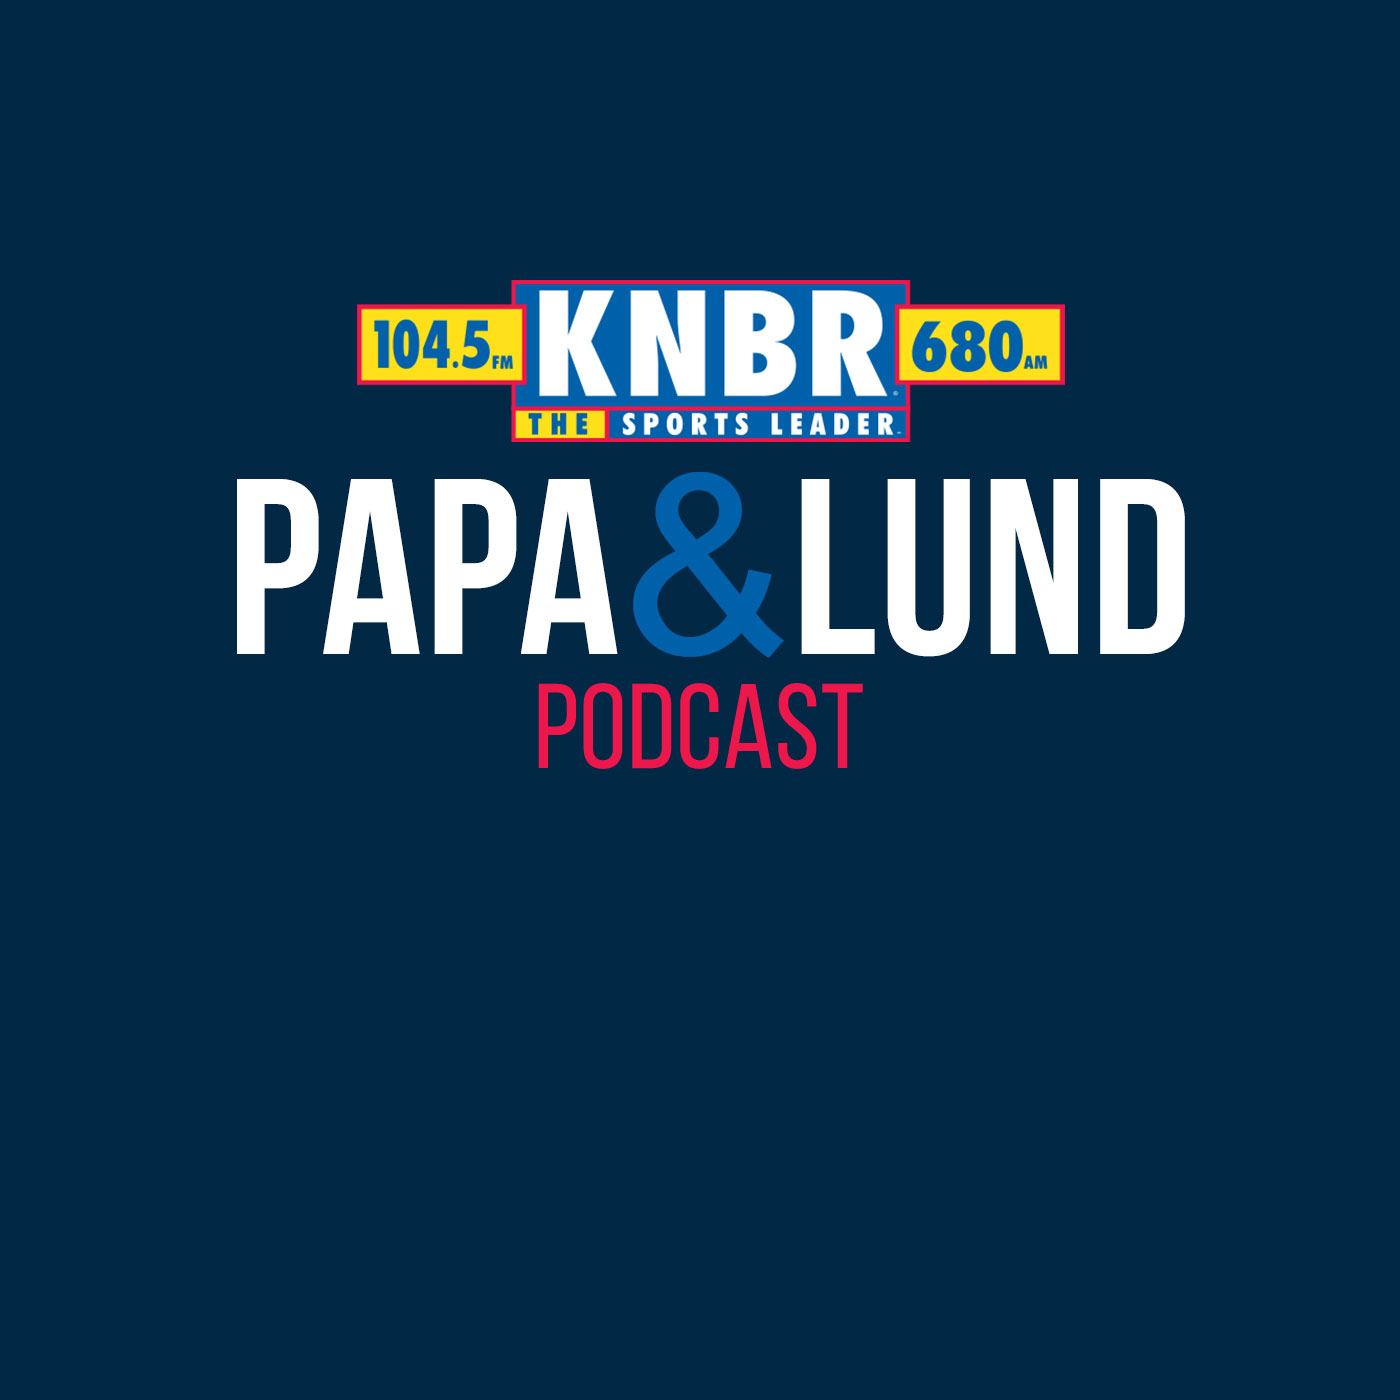 10-28 Jesse Rogers joins Papa & Lund to break down the final two teams as the World Series is set to begin as well as the latest on Aaron Judge rumors